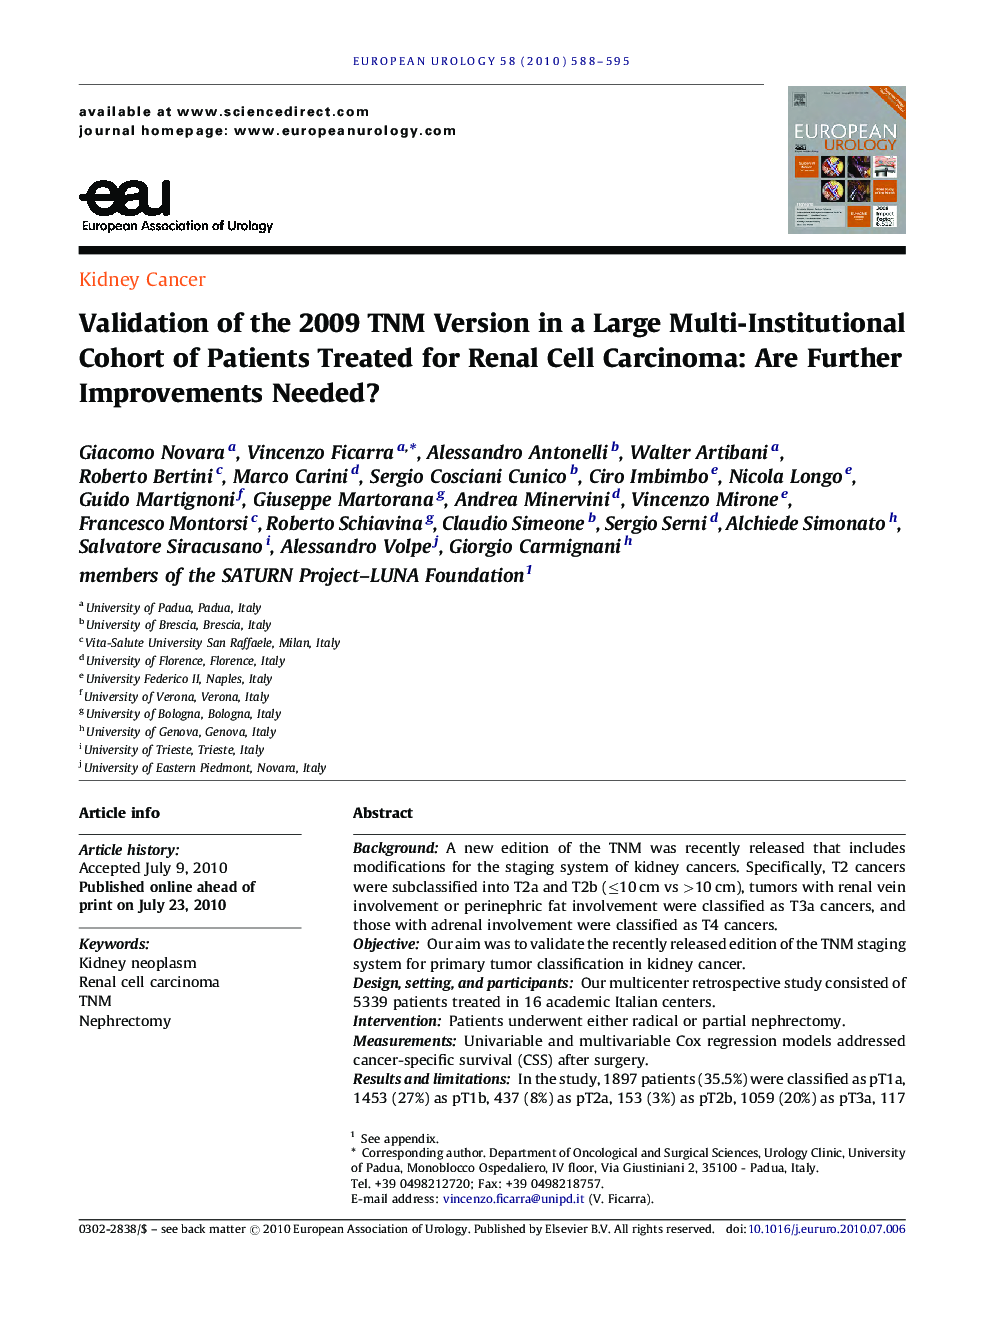 Validation of the 2009 TNM Version in a Large Multi-Institutional Cohort of Patients Treated for Renal Cell Carcinoma: Are Further Improvements Needed?